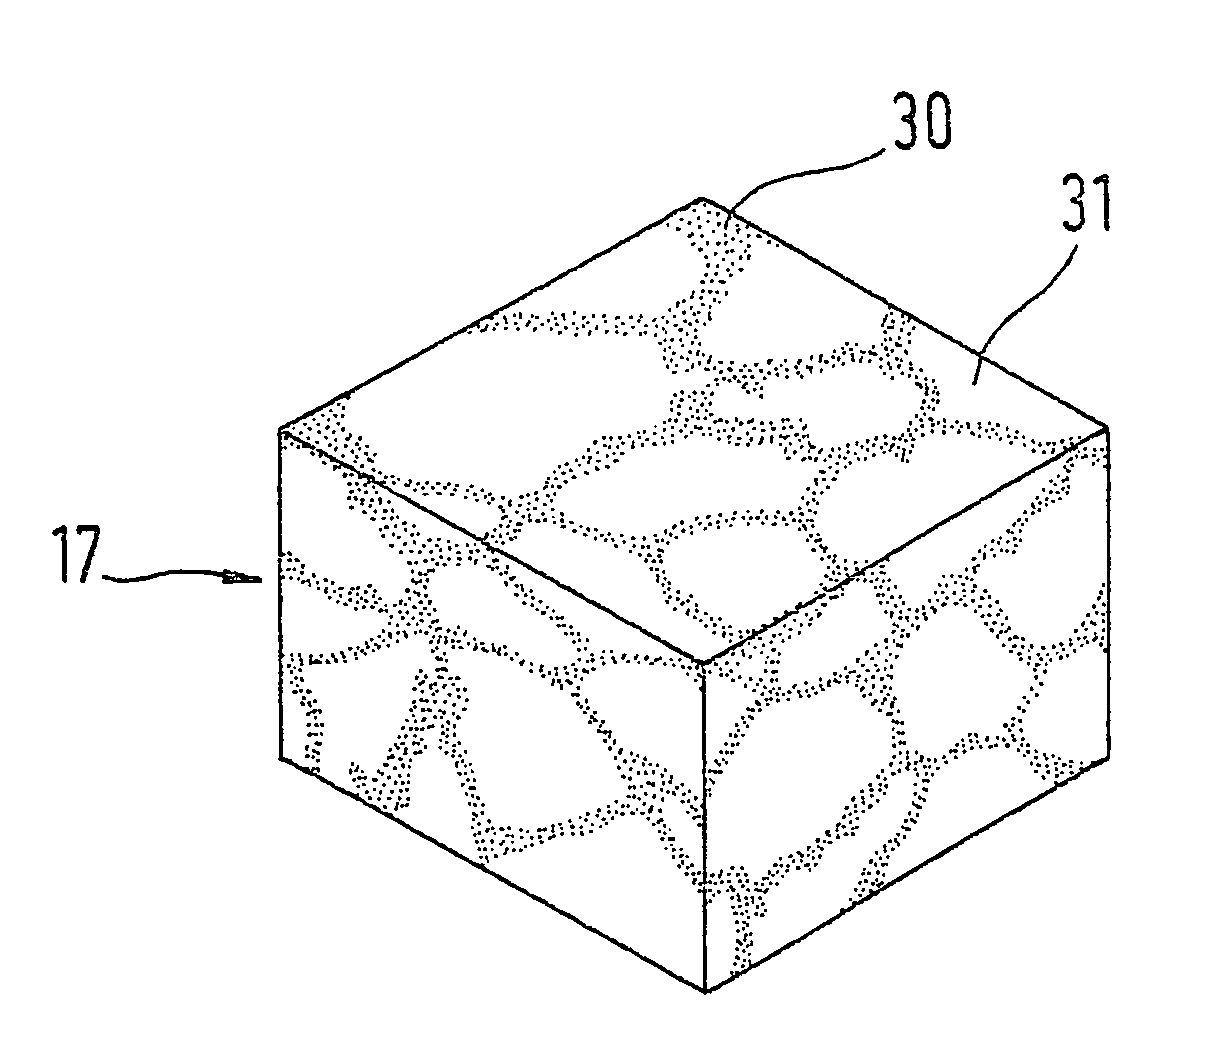 Method for producing a nonostructured functional coating and a coating that can be produced according to said method